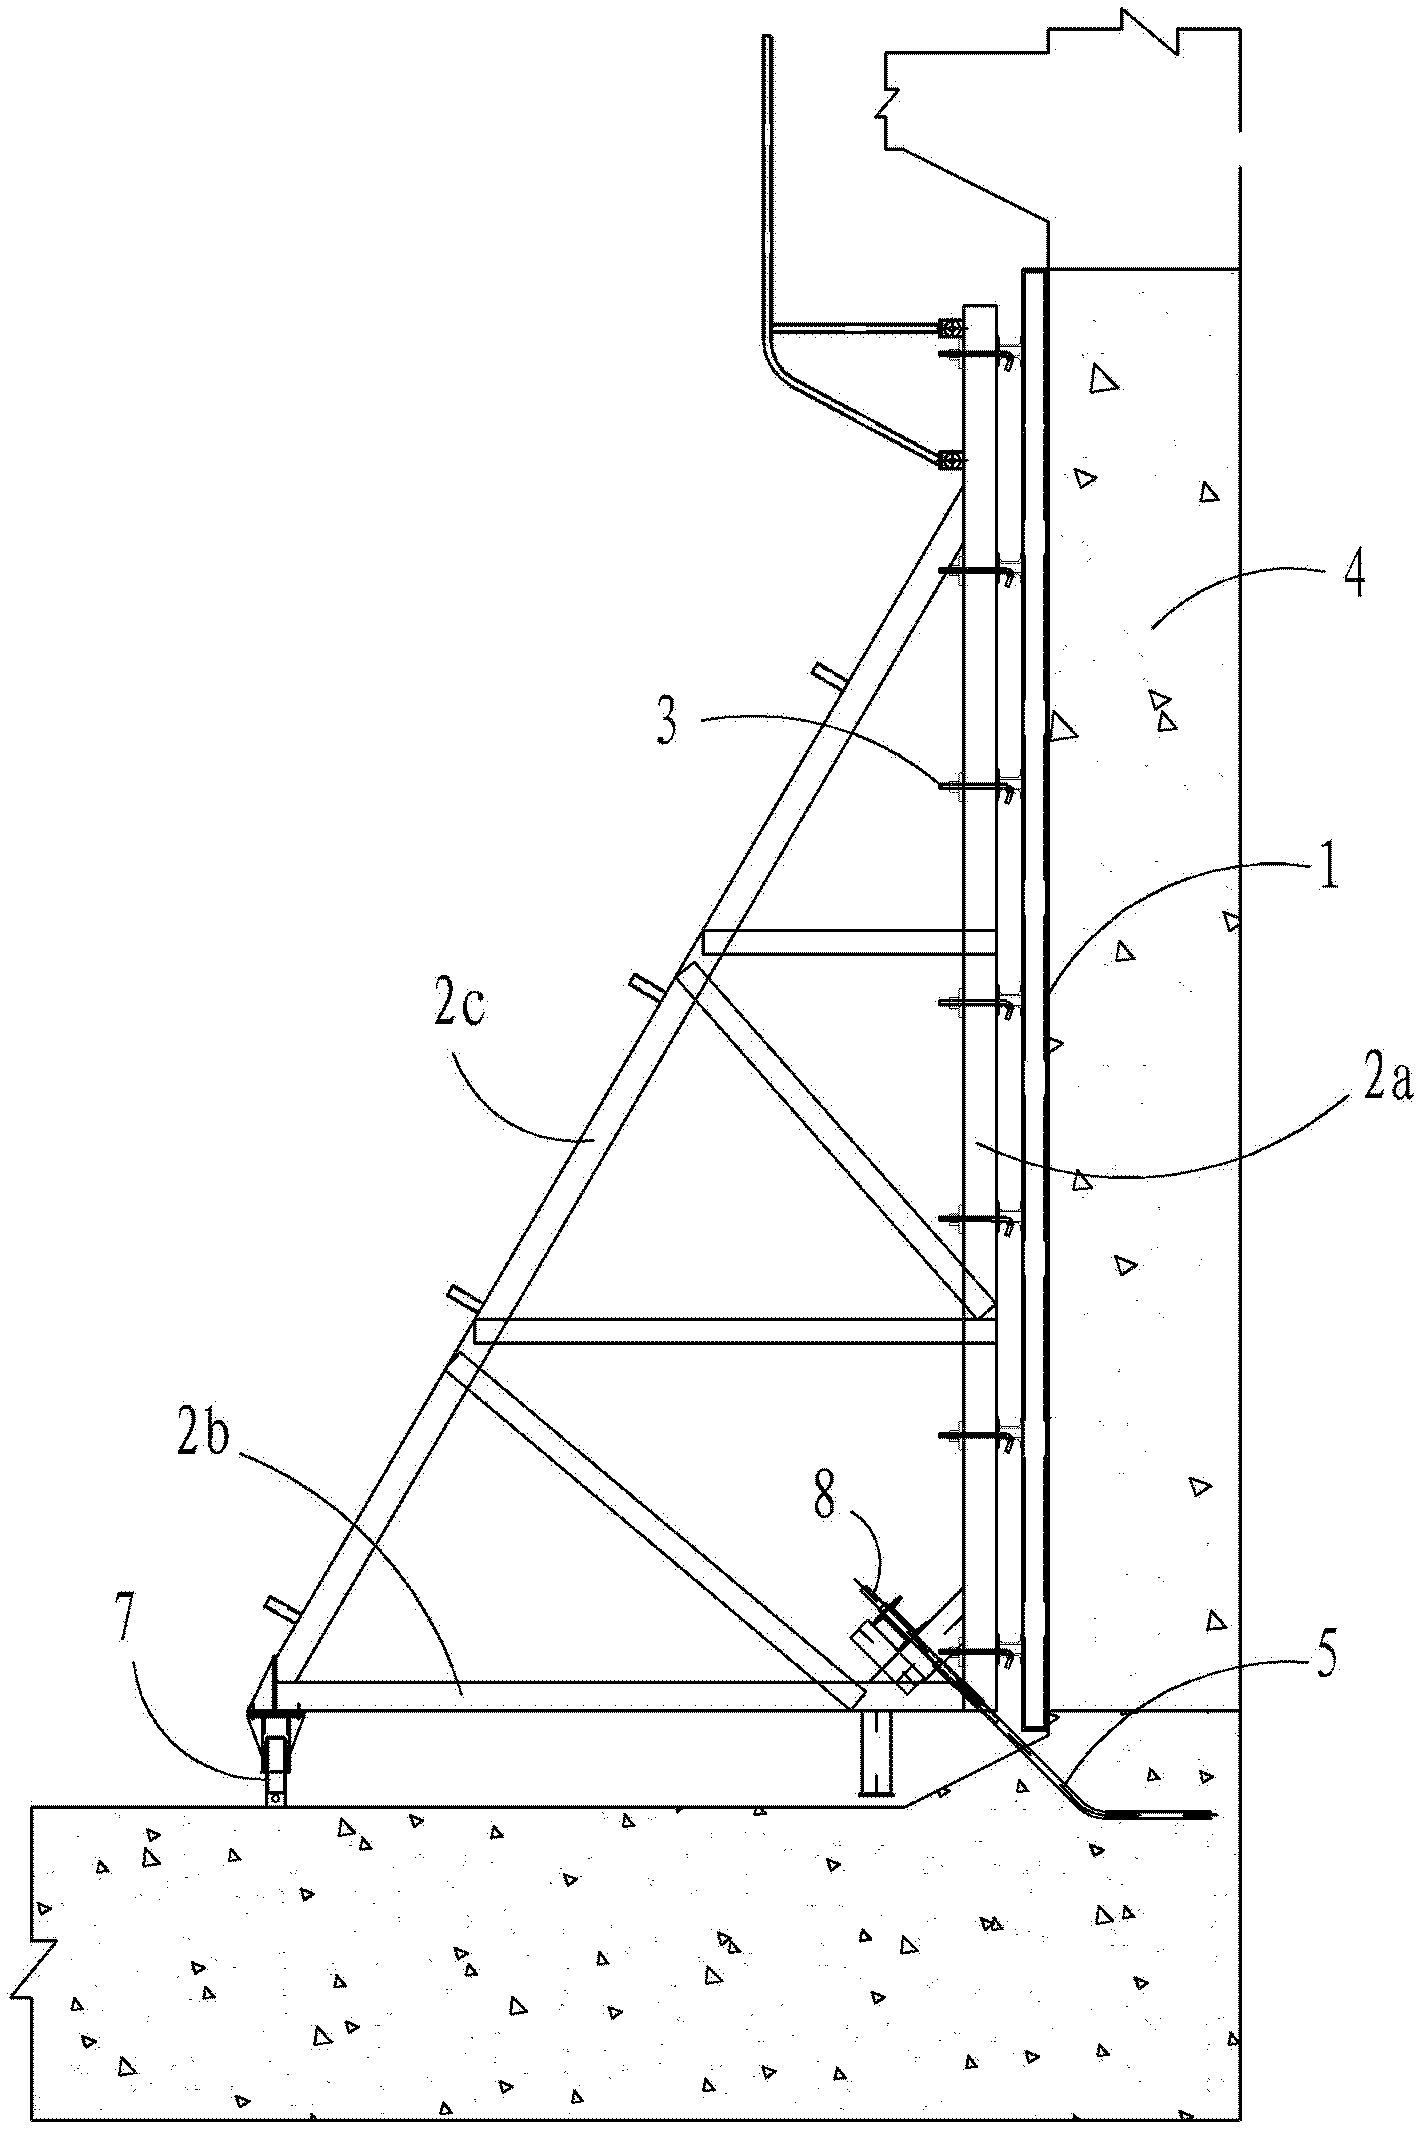 Full water stopping side wall template system